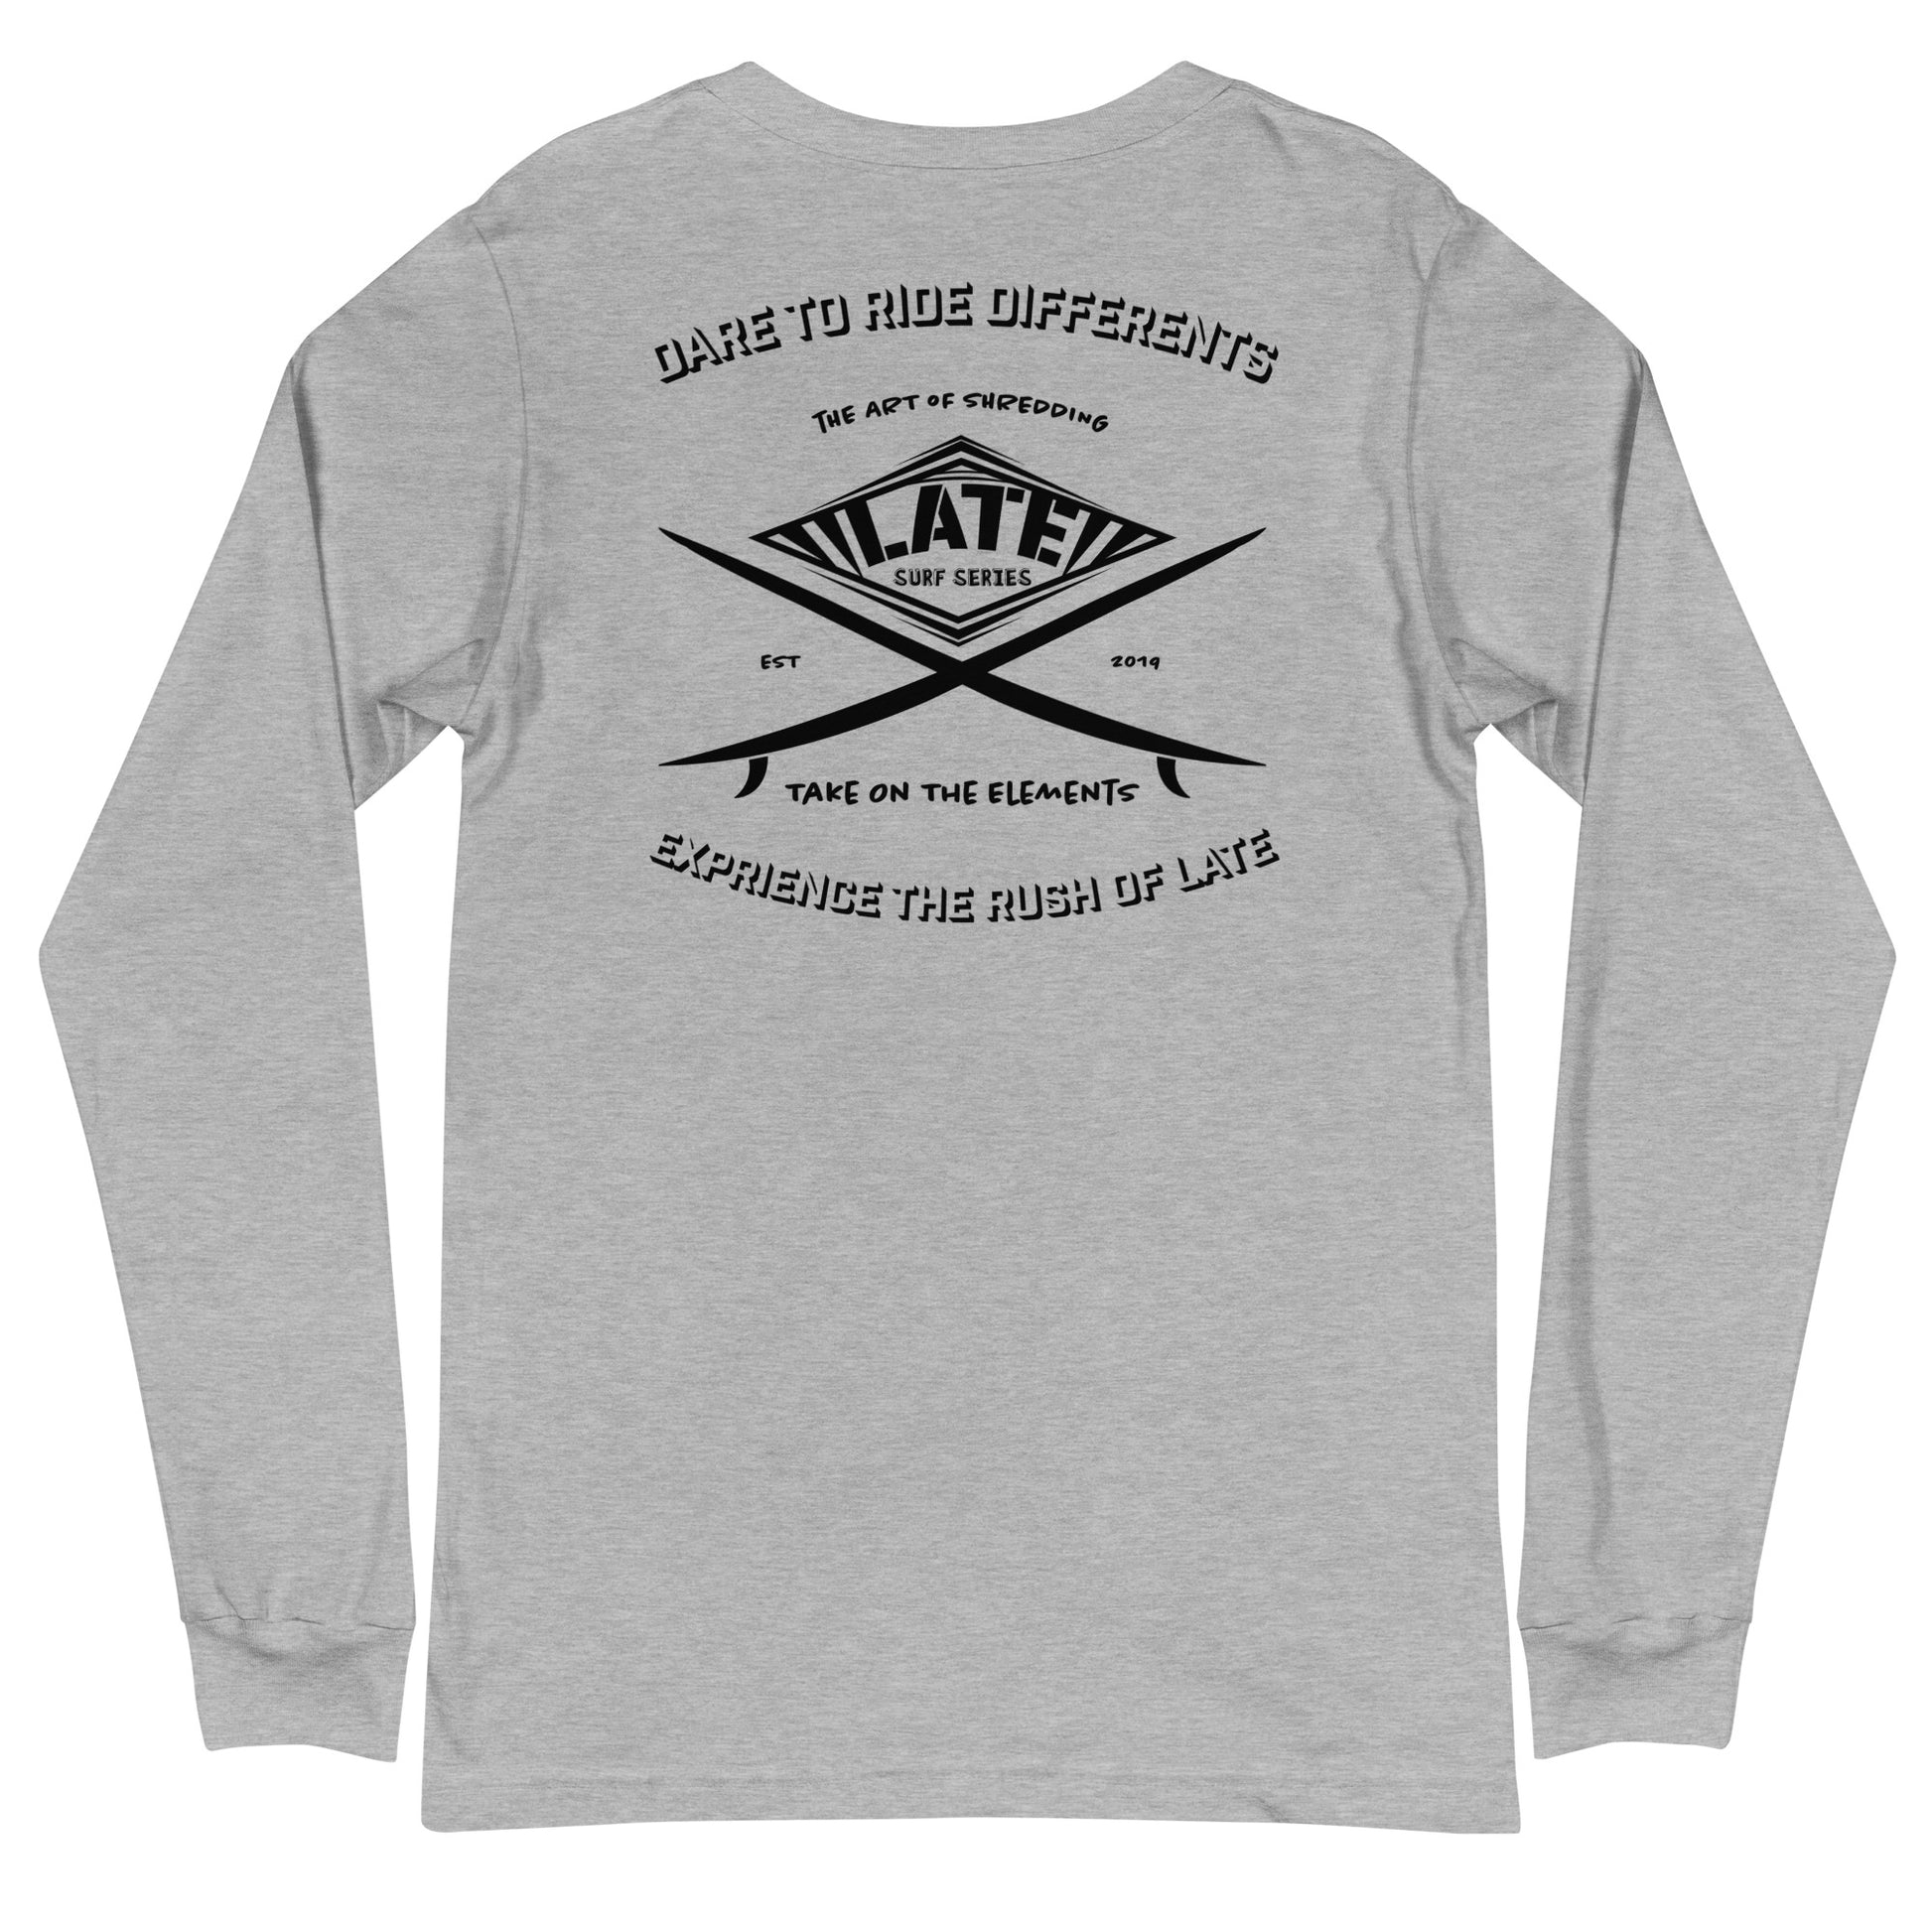 Long Sleeve surf vintage Take On The Elements Logo Late surf series, texte dare to ride differents couleur gris